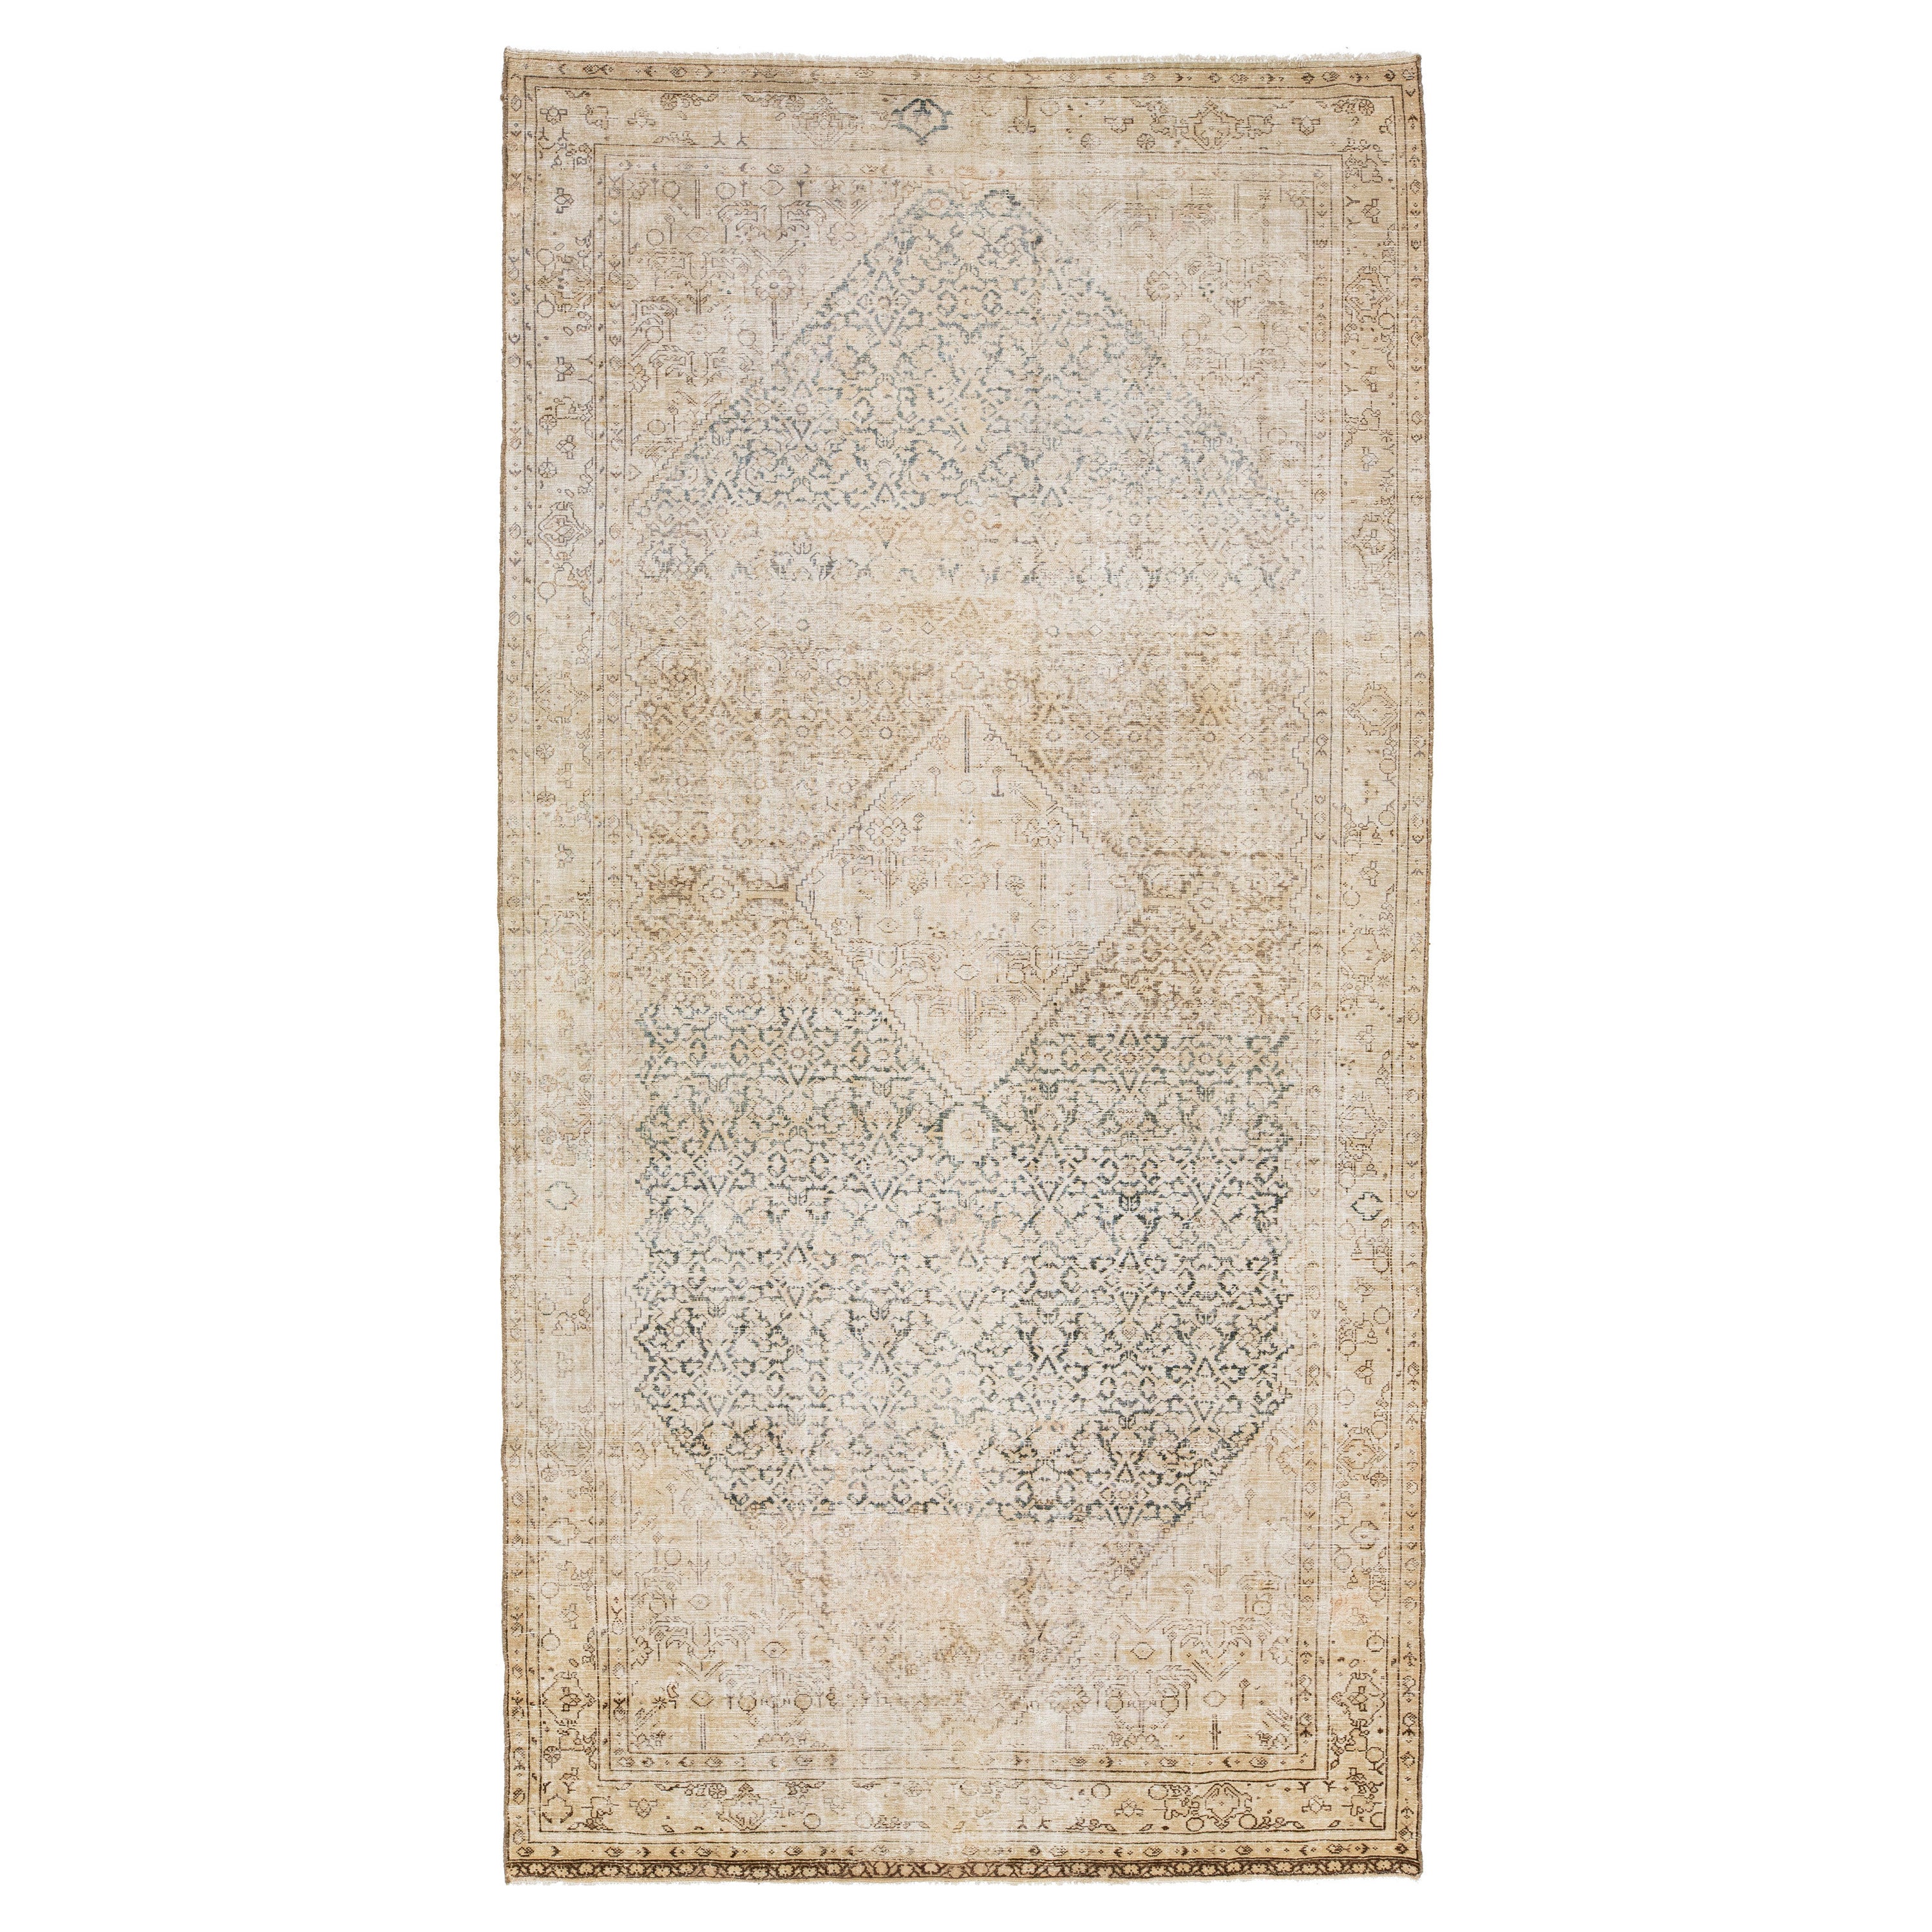  Beige Antique Malayer Persian Wool Rug With Center Design